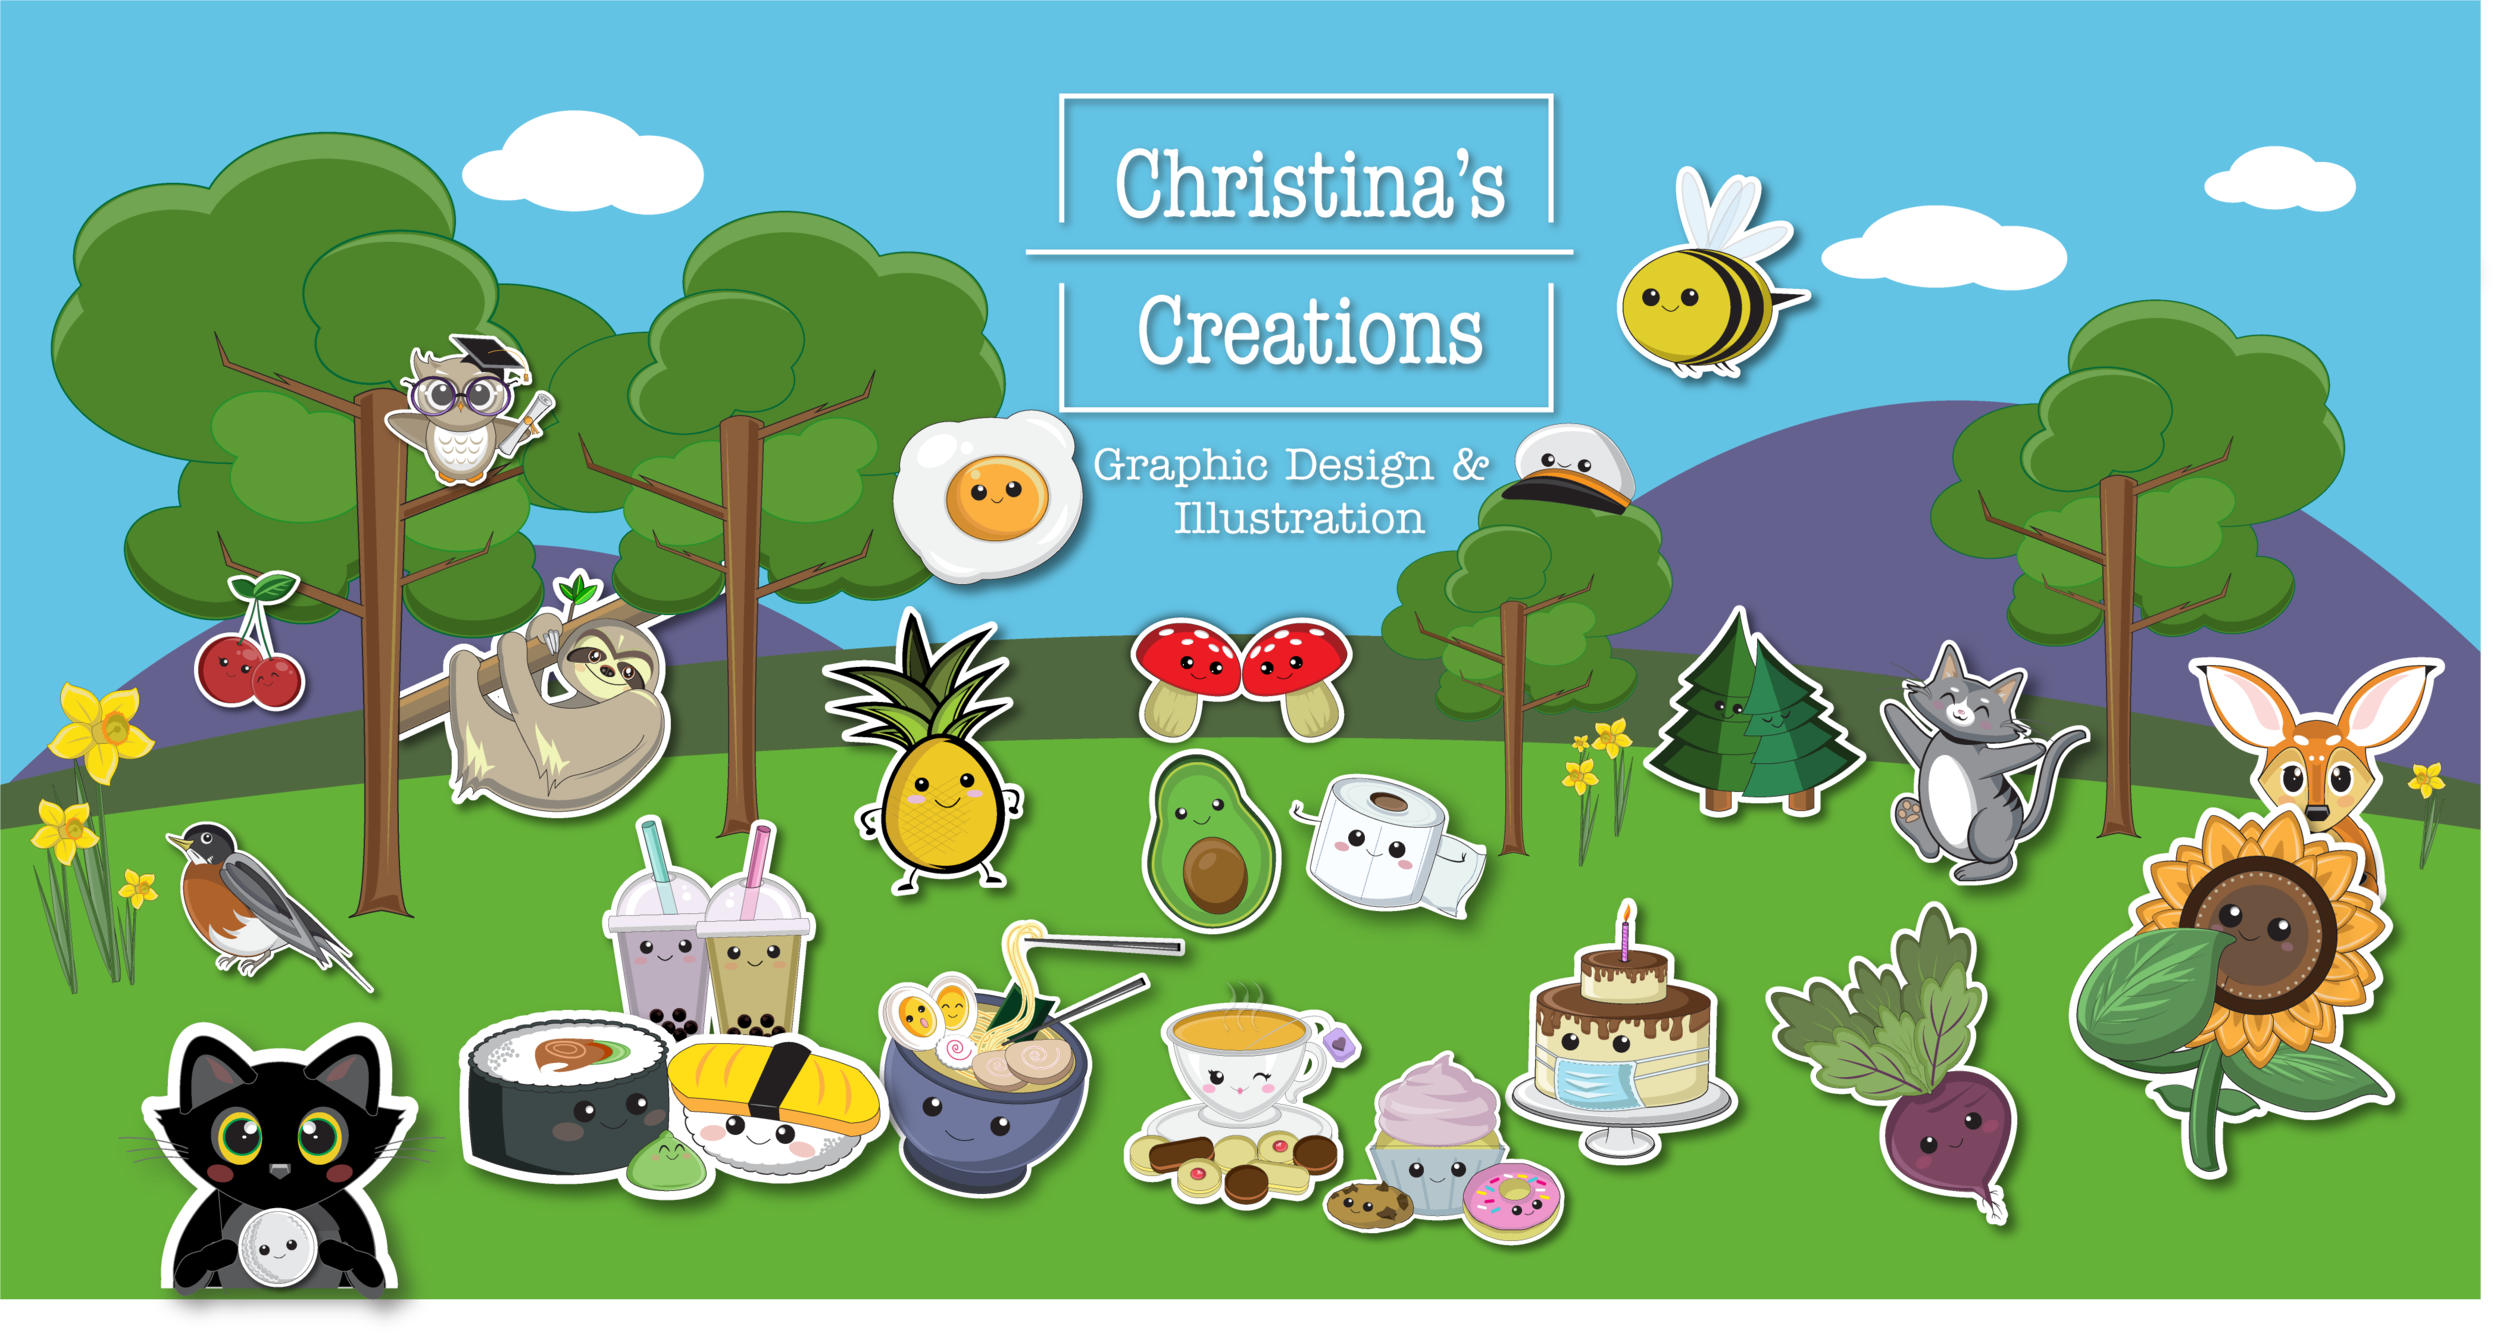 Christina'sCreations-GraphicDesign&Illustration-CharacterCollage2.png